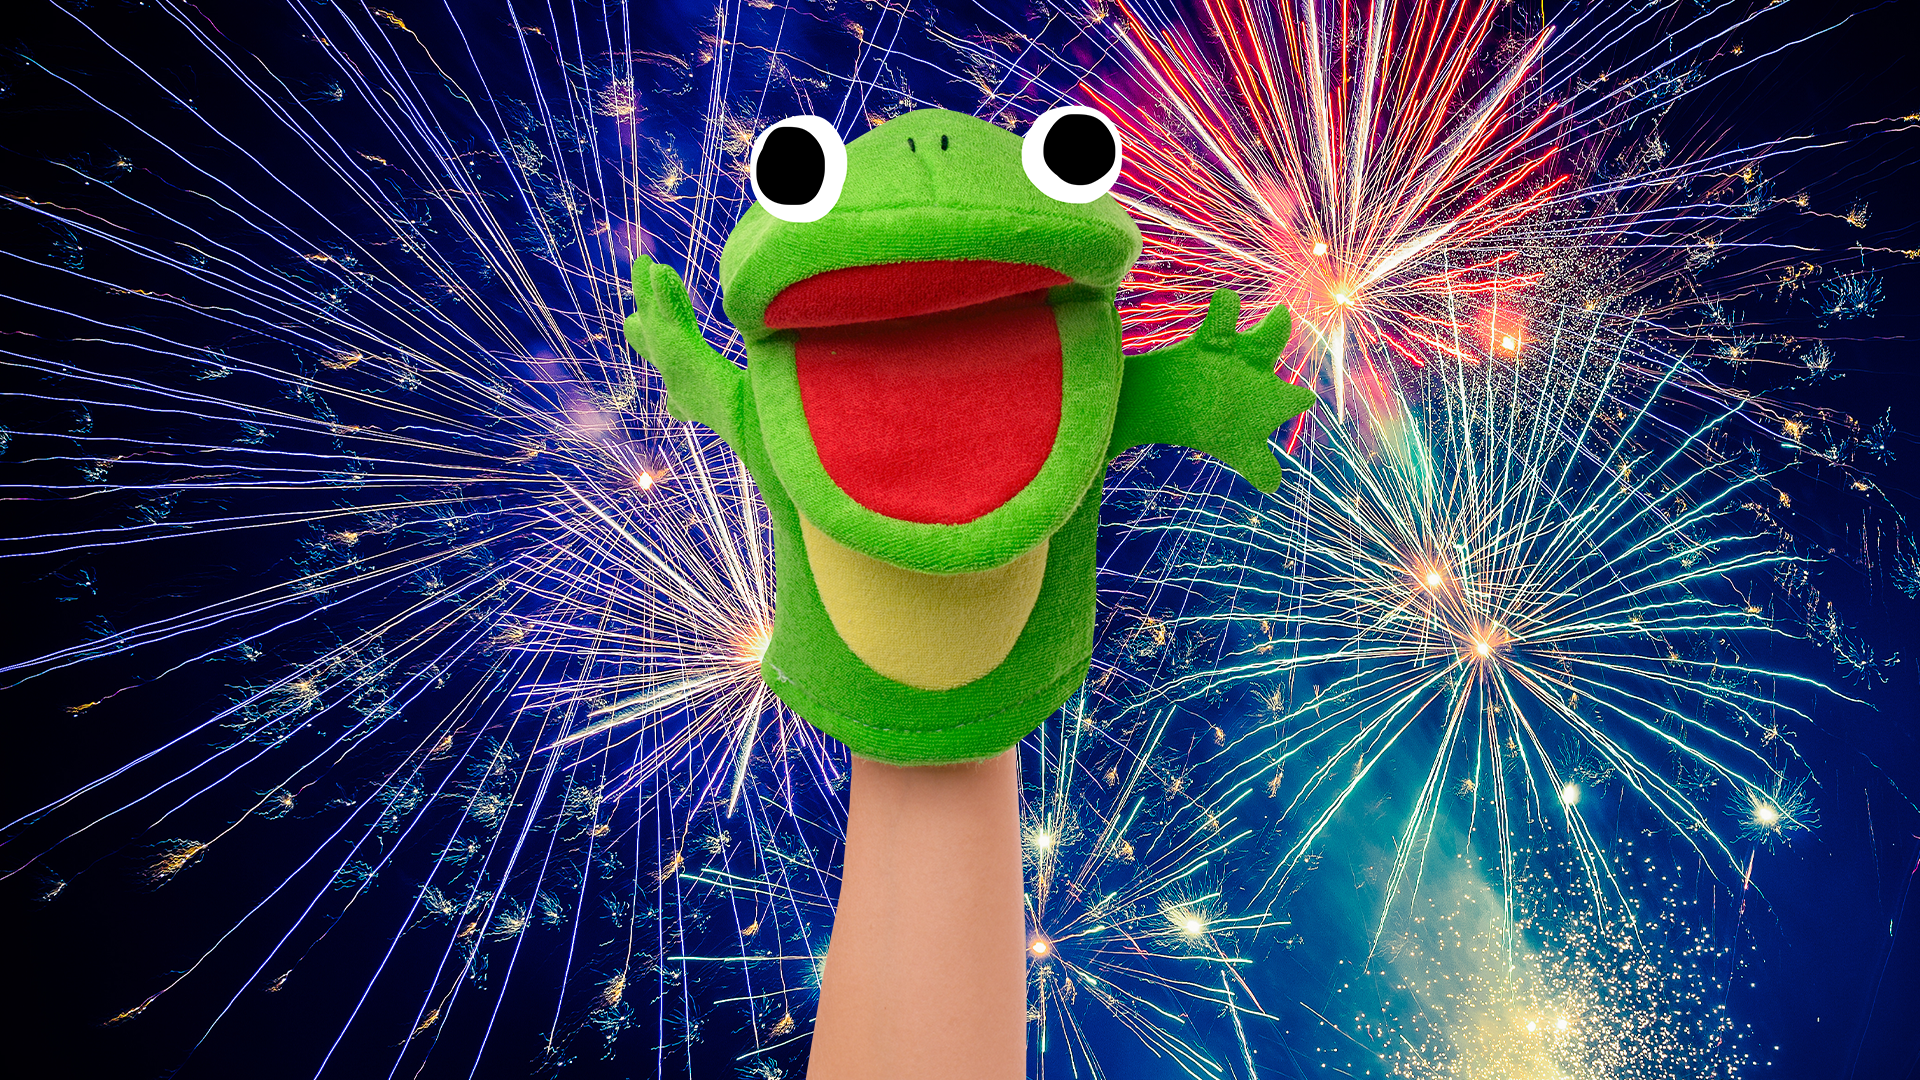 Puppet Kermit and fireworks